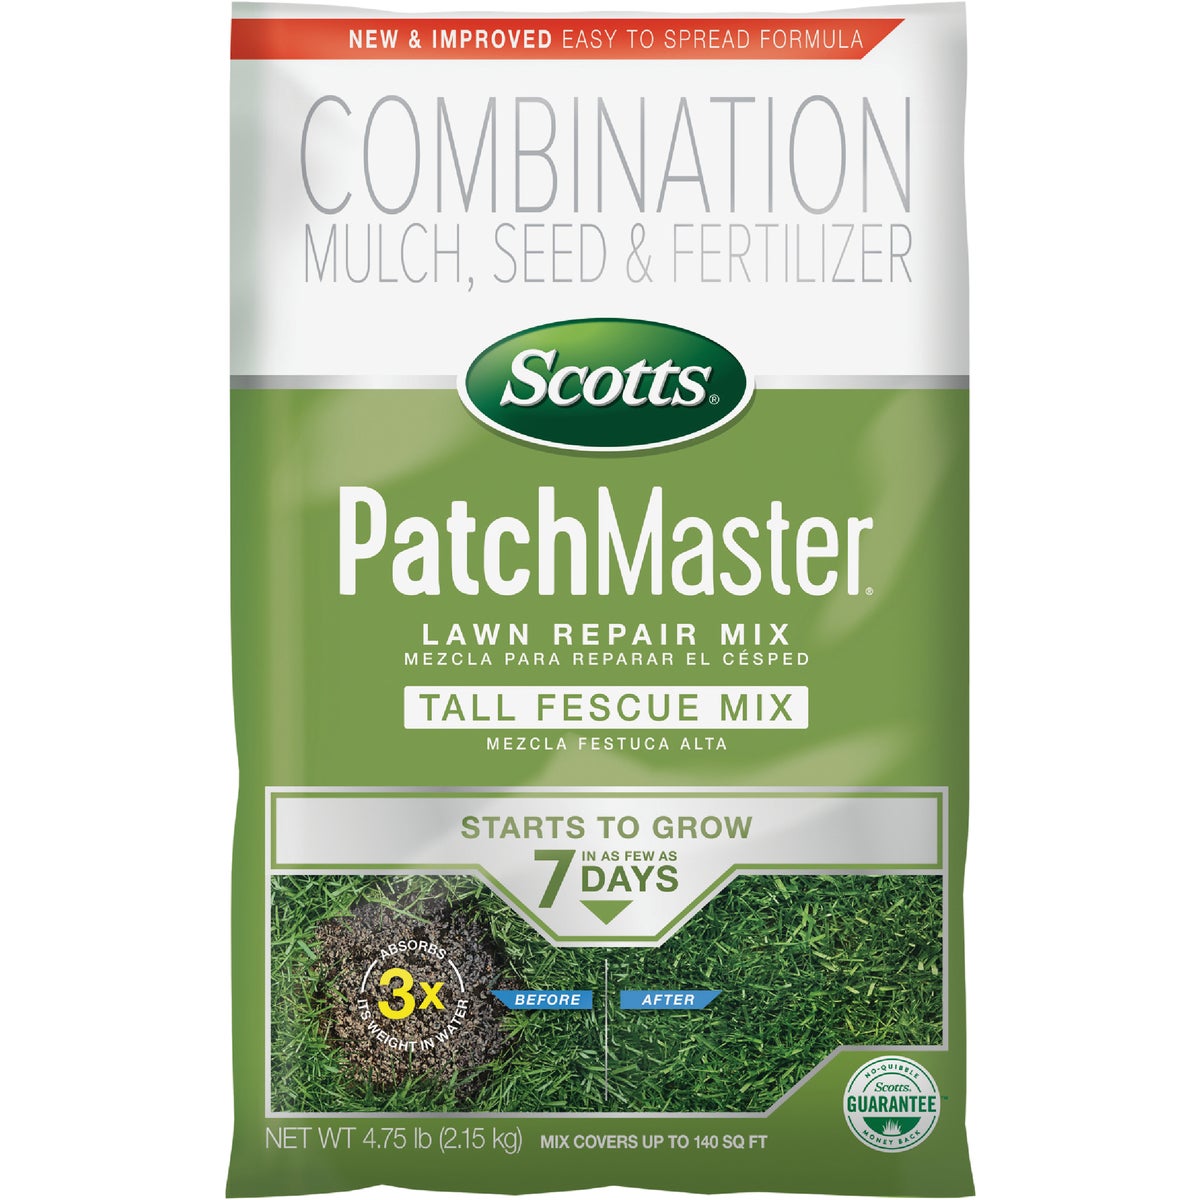 Item 714365, Scotts PatchMaster Lawn Repair Mix Tall Fescue Mix comes pre-mixed to make 